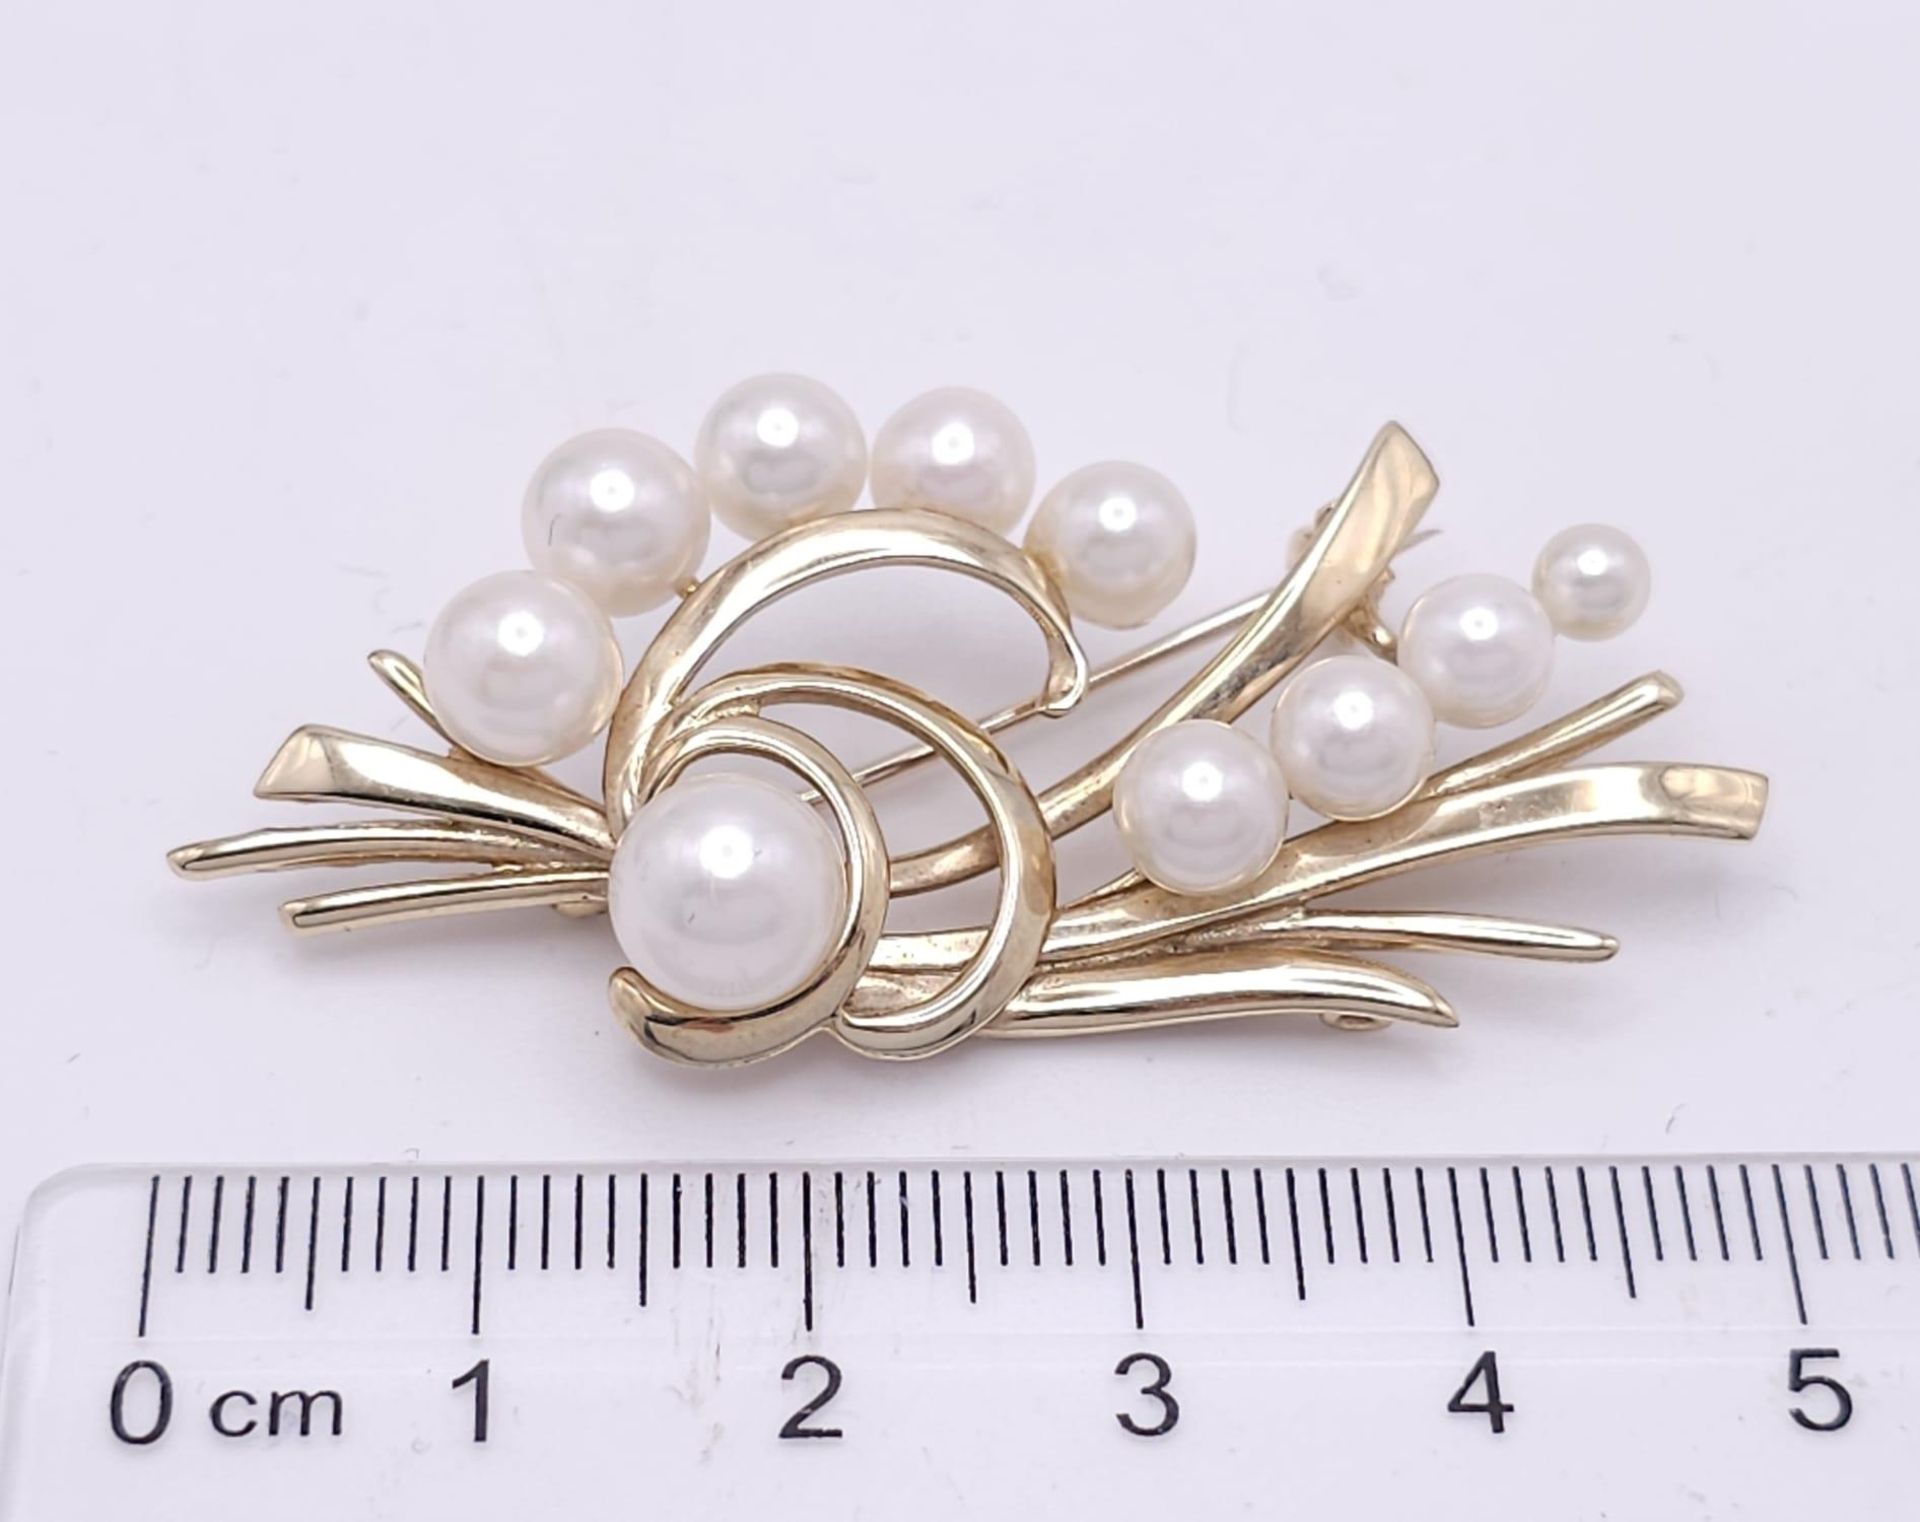 A 9k Yellow Gold and Pearl Decorative Floral Brooch. 5cm. 8g weight - Image 20 of 23